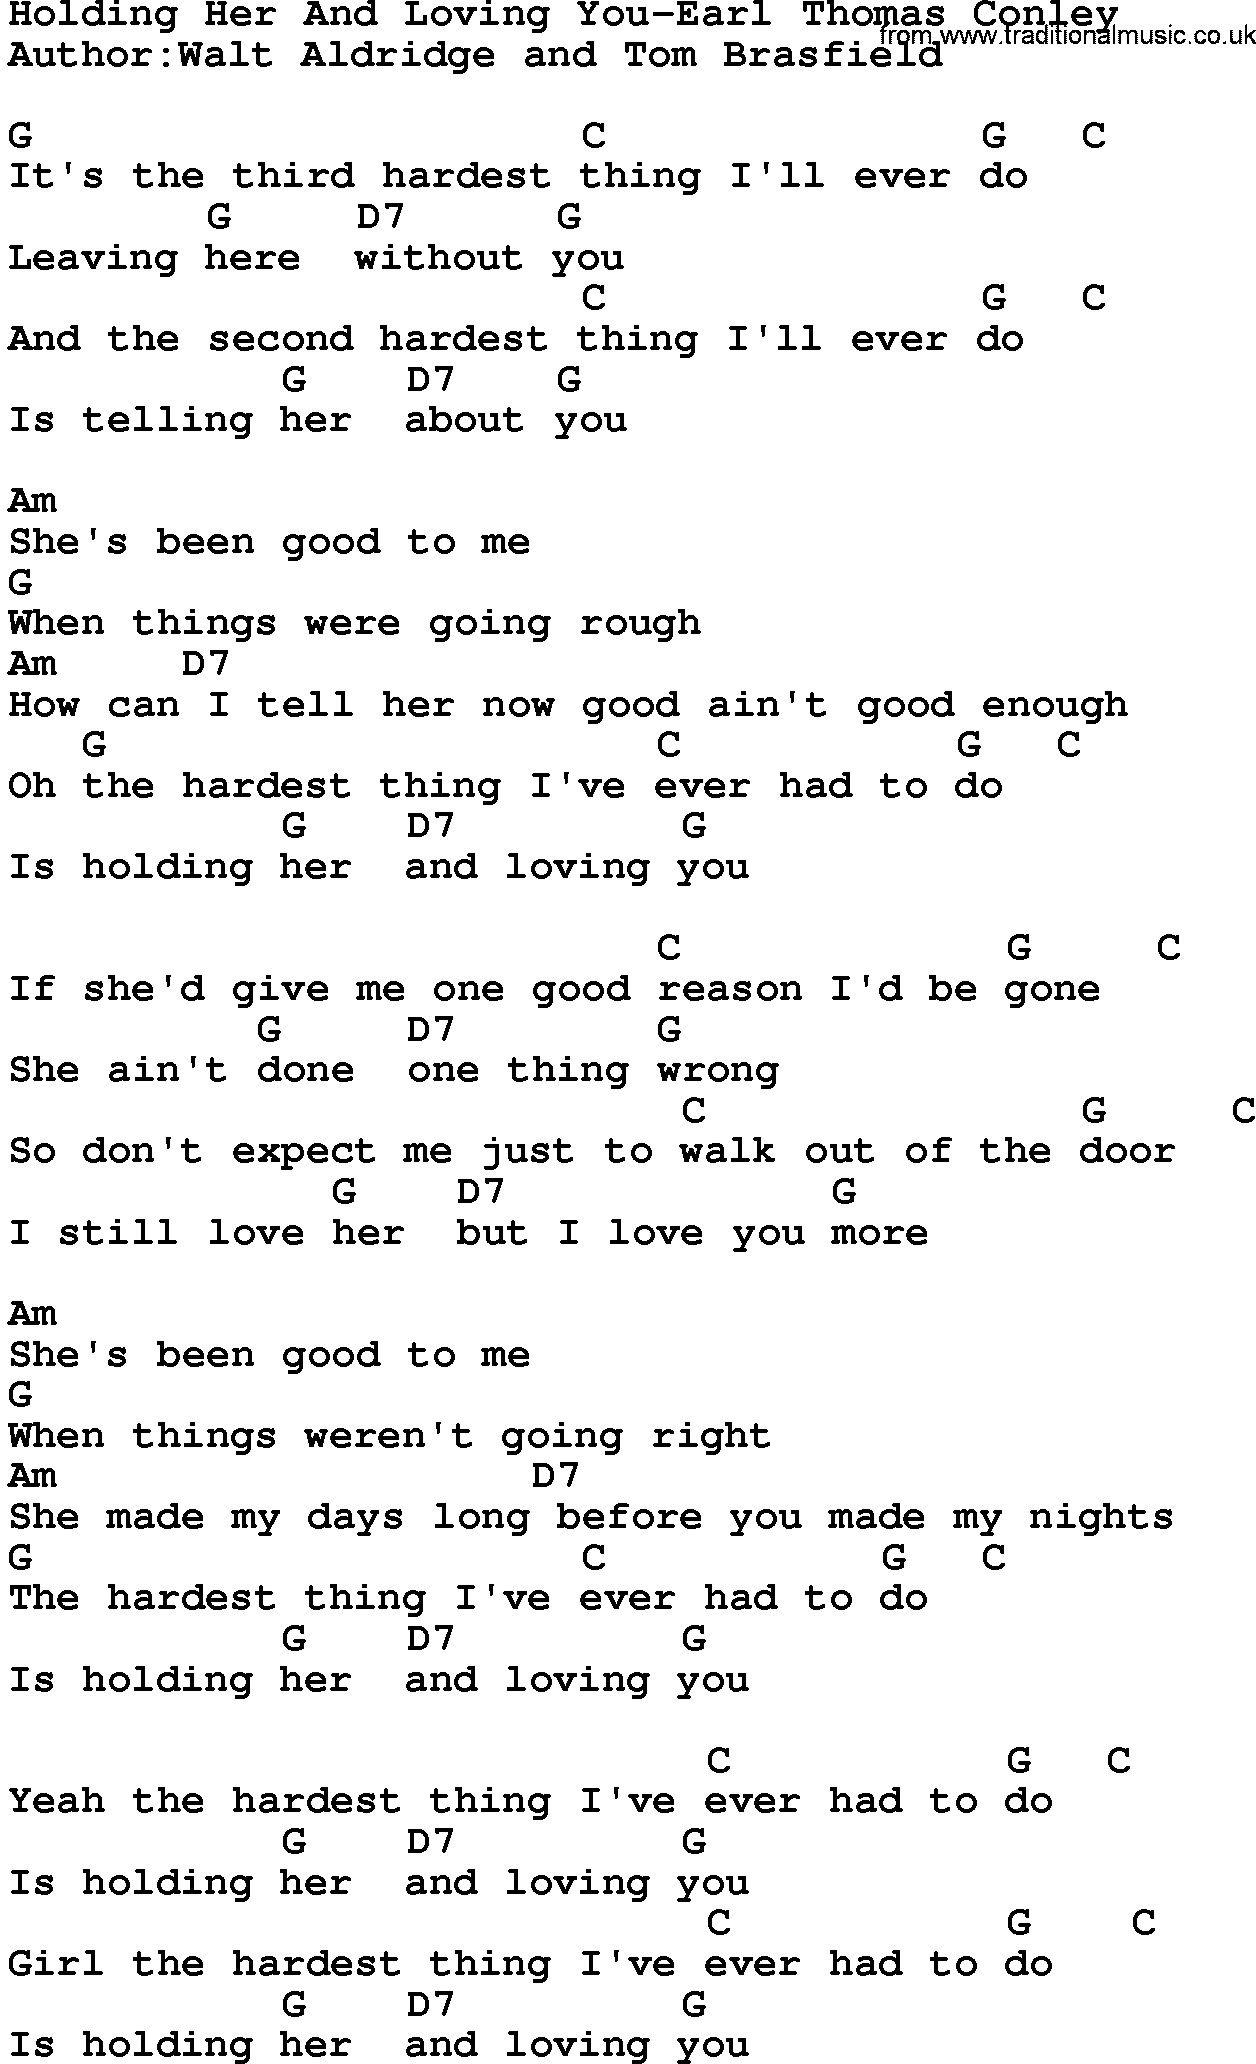 Country music song: Holding Her And Loving You-Earl Thomas Conley lyrics and chords